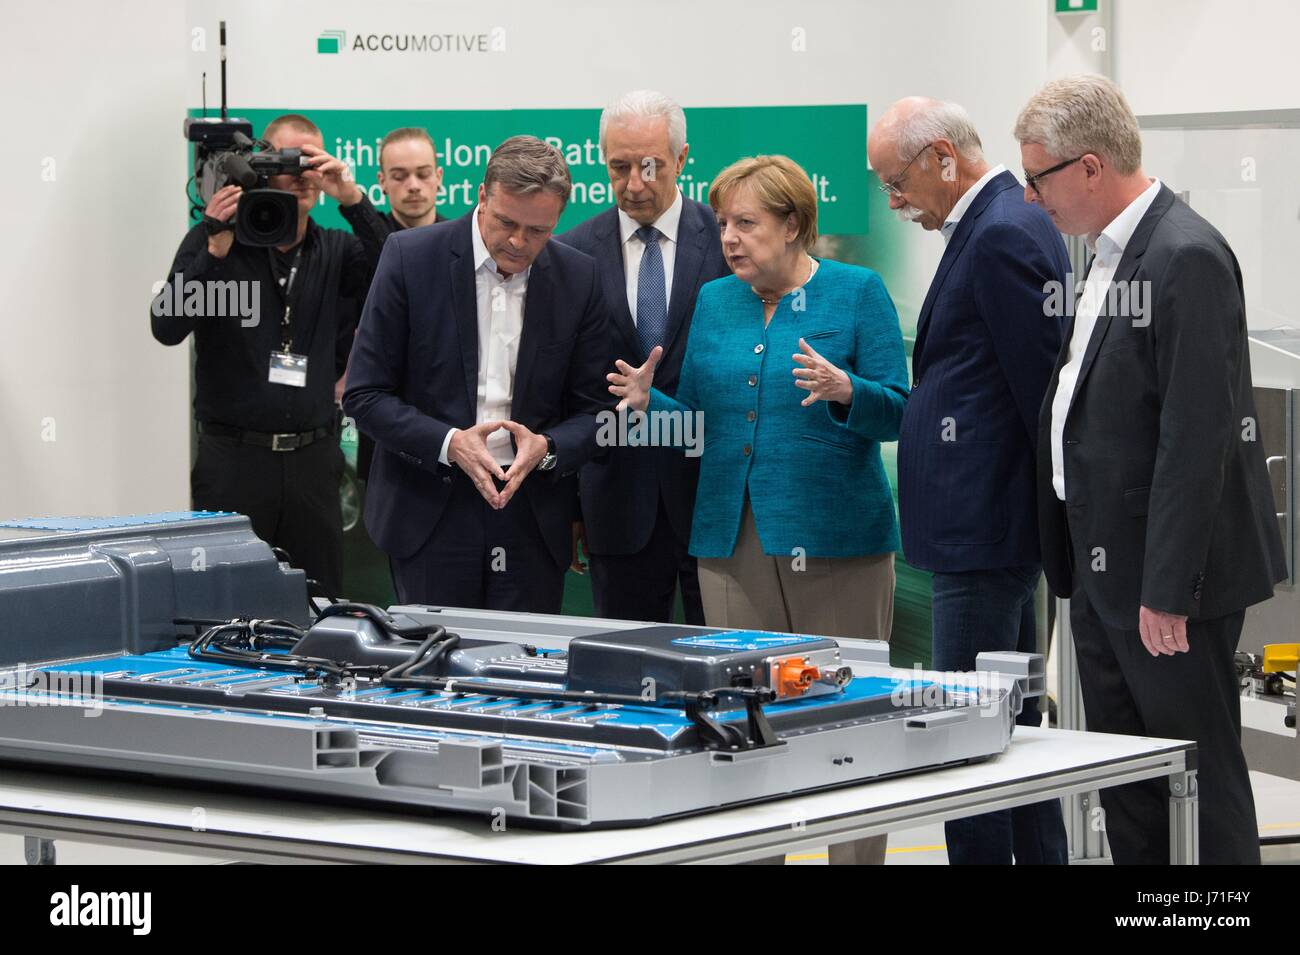 Kamenz, Germany. 22nd May, 2017. Markus Schaefer (L-R), a member of the board of directors of Mercedes-Benz Cars, the premier of the state of Saxony Stanislaw Tillich (CDU), German chancellor Angela Merkel (CDU), the CEO of Damiler Dieter Zetsche, and the CEO of Accumotive Frank Blome during a tour of the Daimler subsidiary's workshop in Kamenz, Germany, 22 May 2017. The foundation stone for a new Accumotive battery factory was laid on the same day. Credit: dpa picture alliance/Alamy Live News Stock Photo